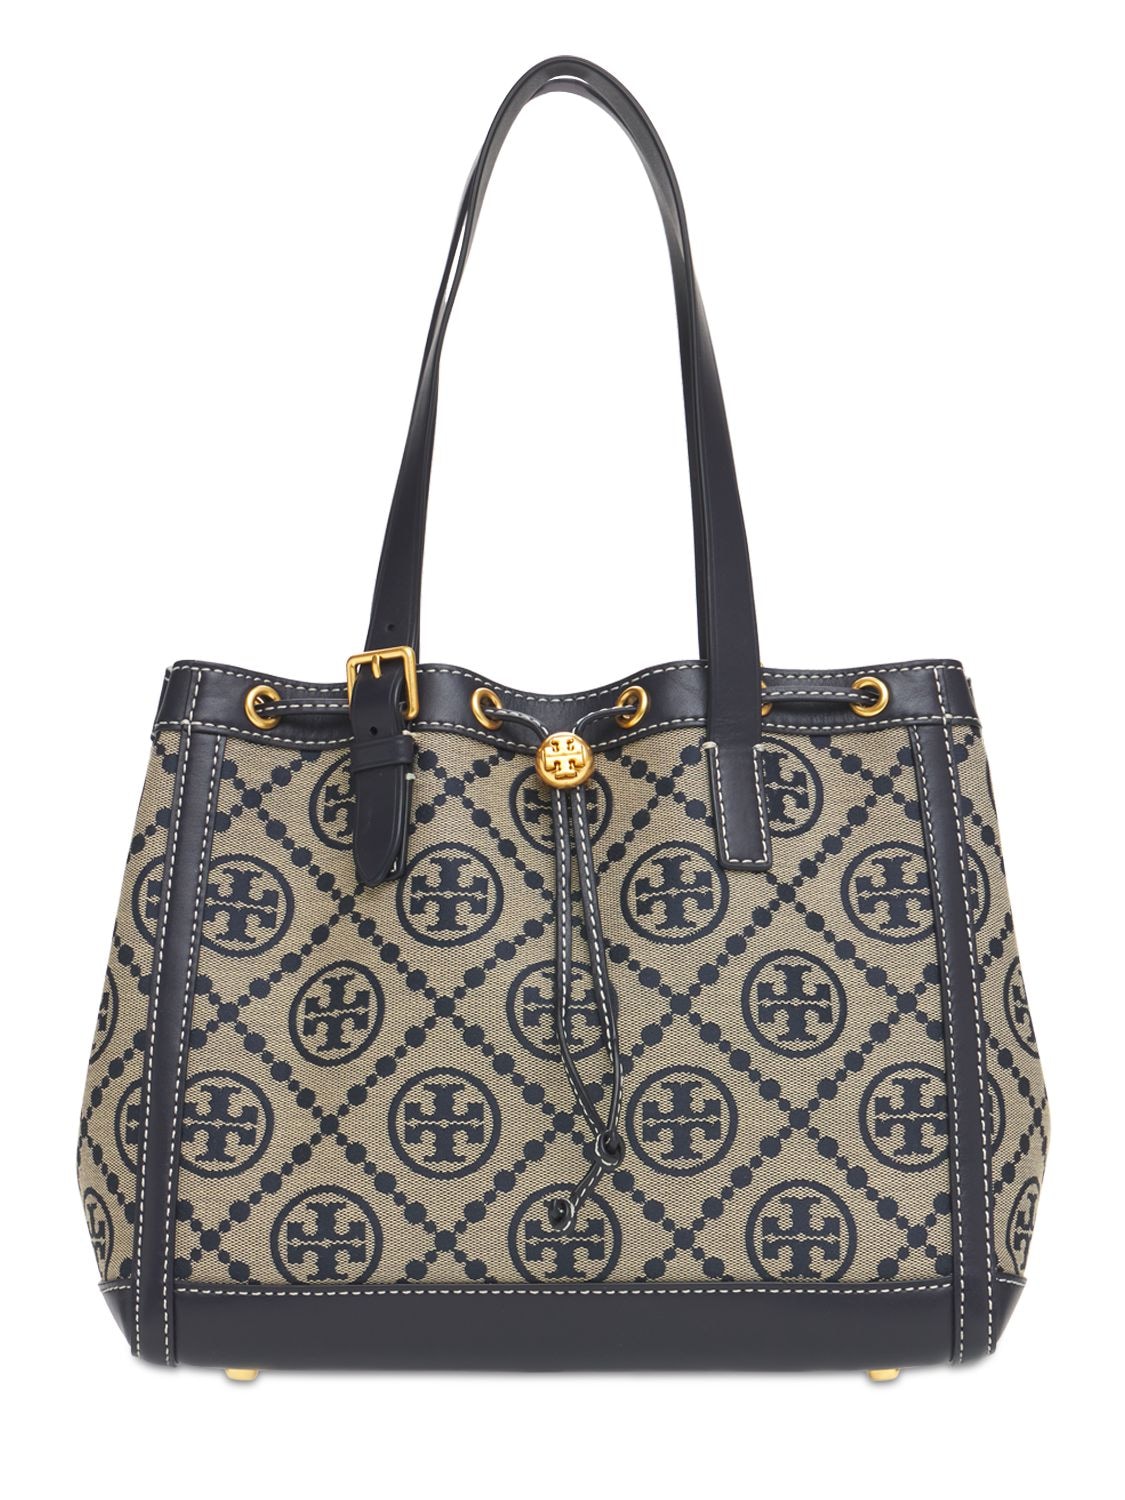 TORY BURCH Small T Monogram Perry Tote Bag for Women